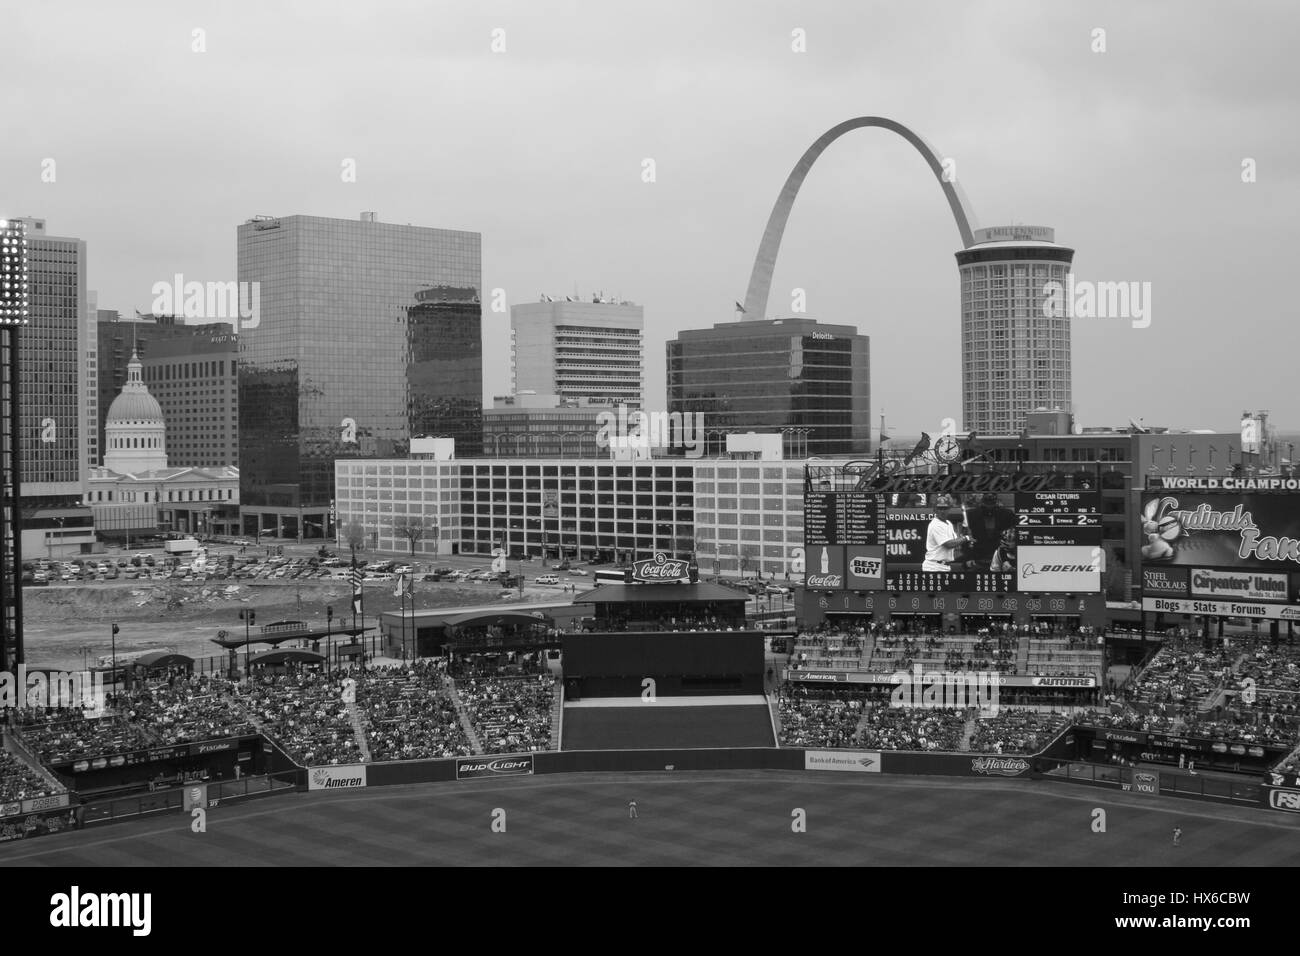 St Louis Prints Black and White: Busch Stadium at Night at Clark and Spruce